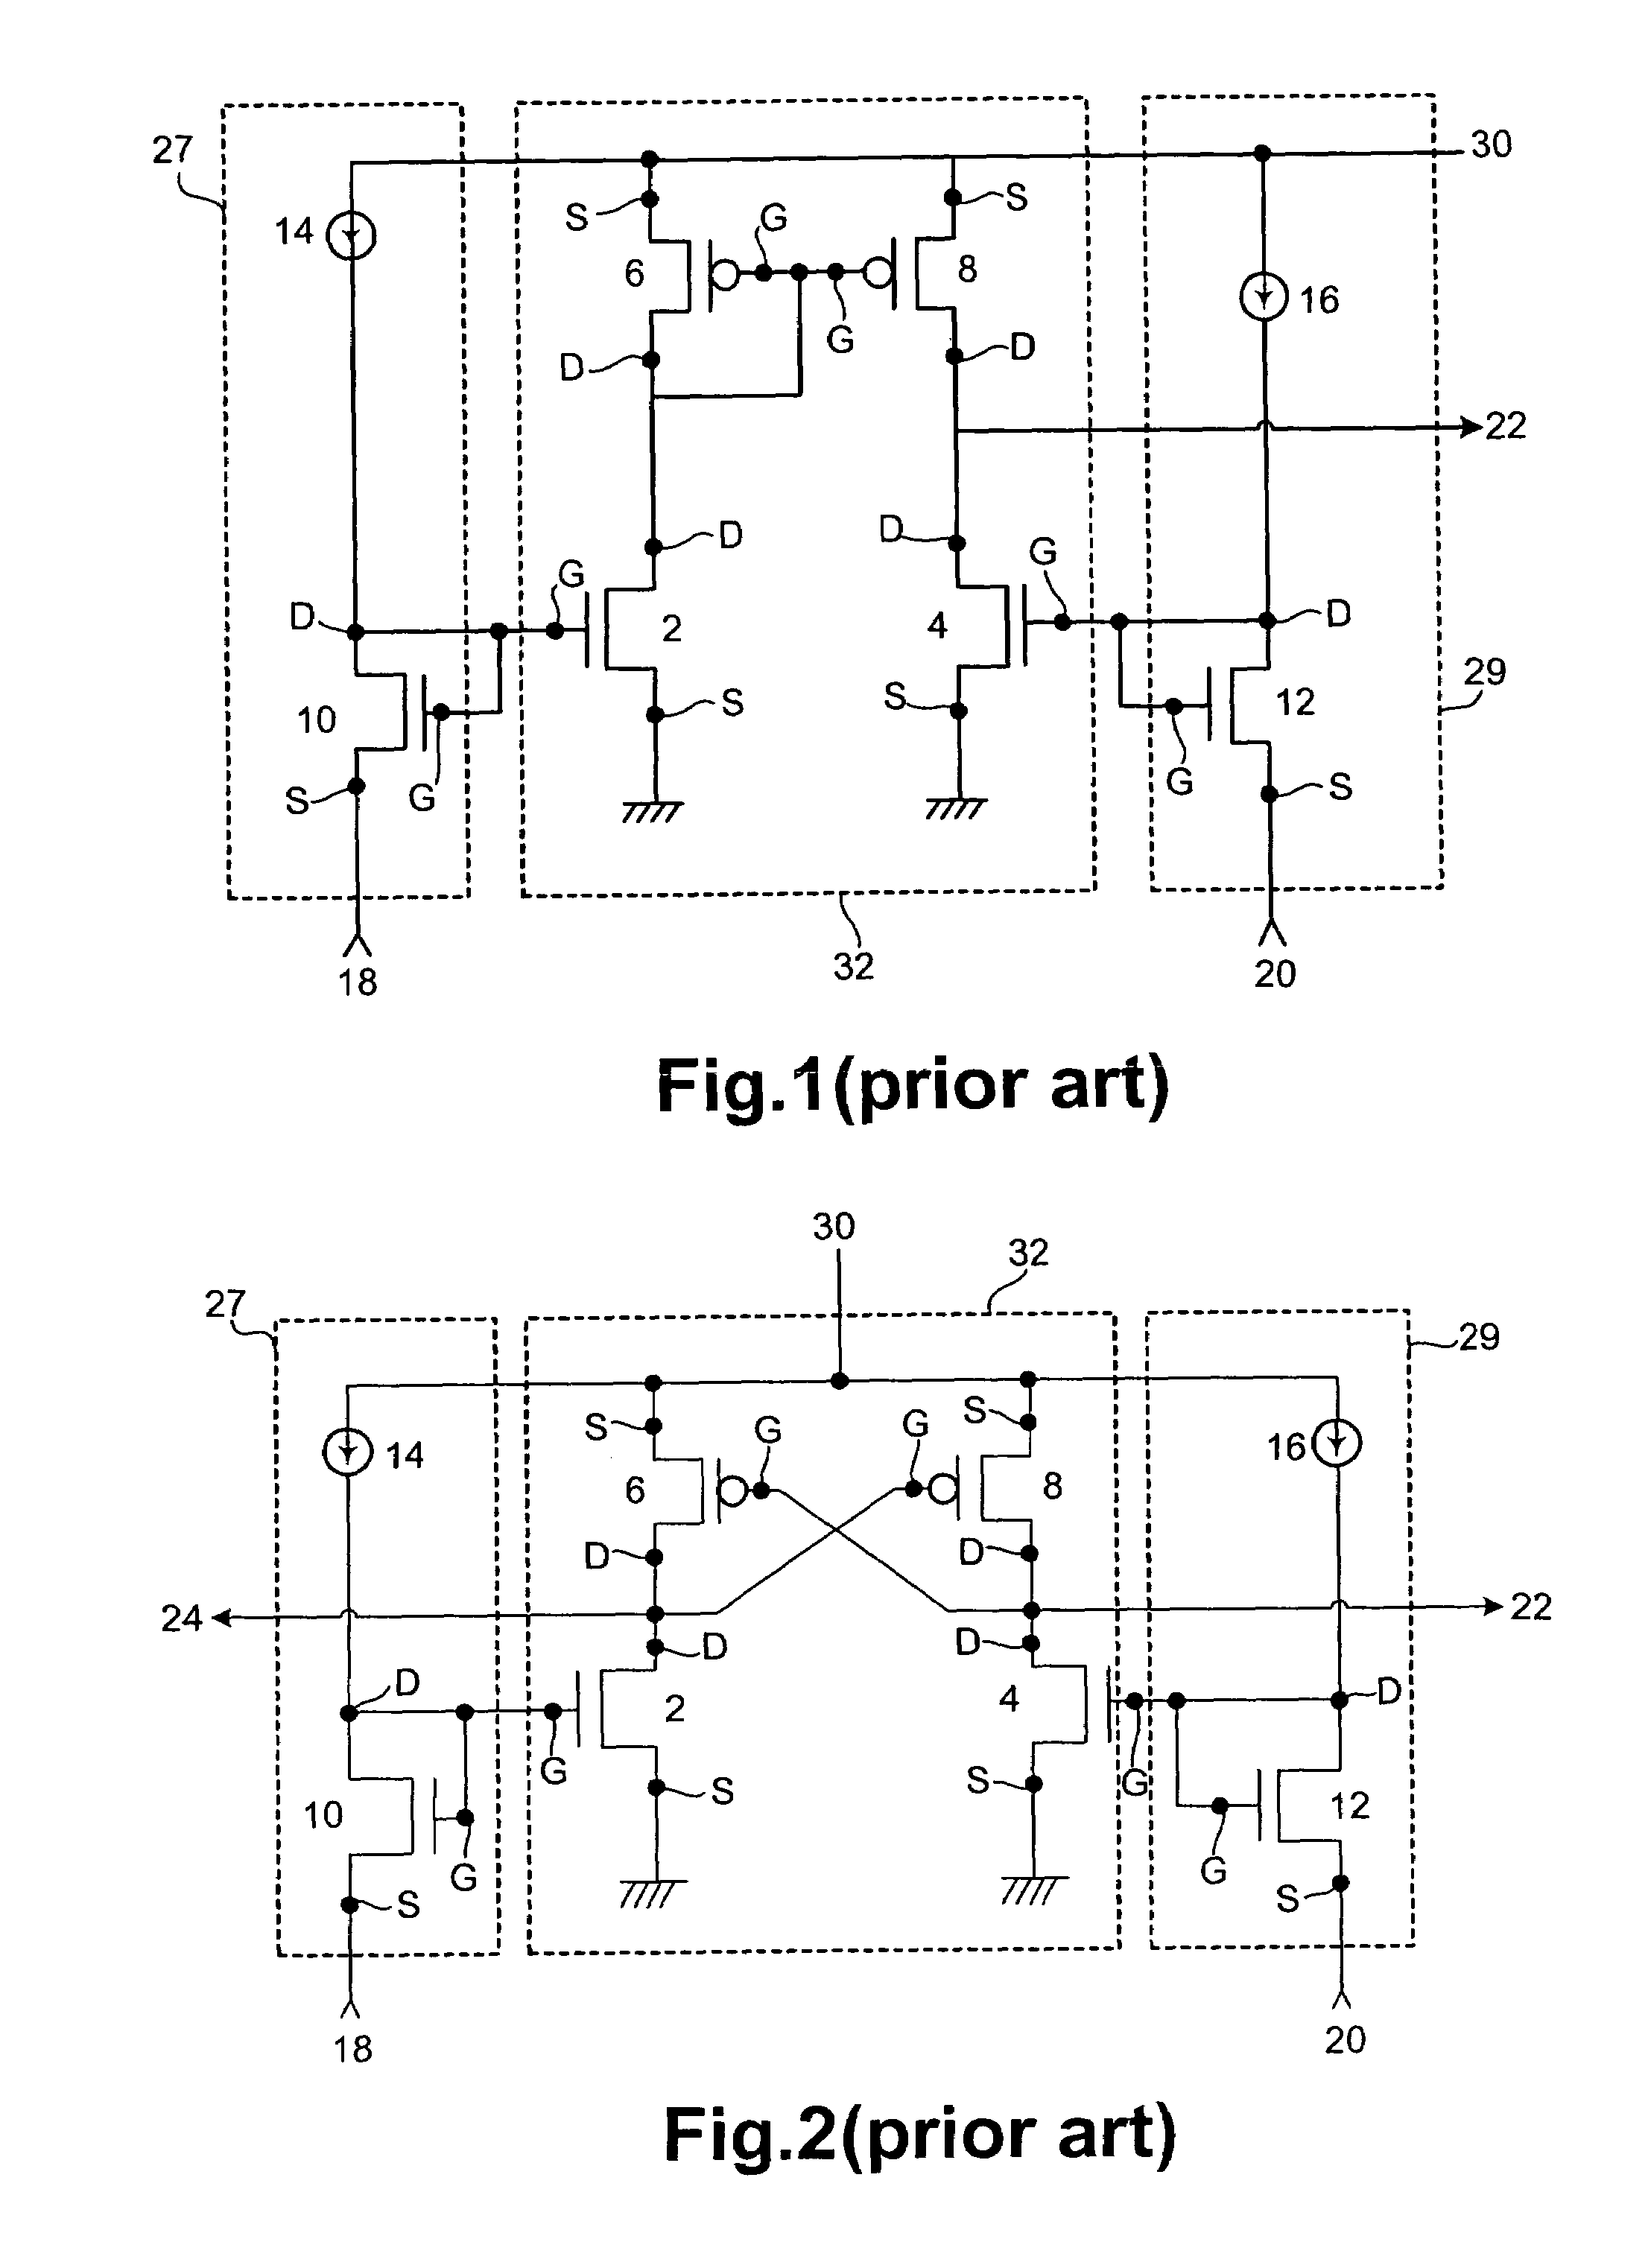 Level shifter with body-biased circuit